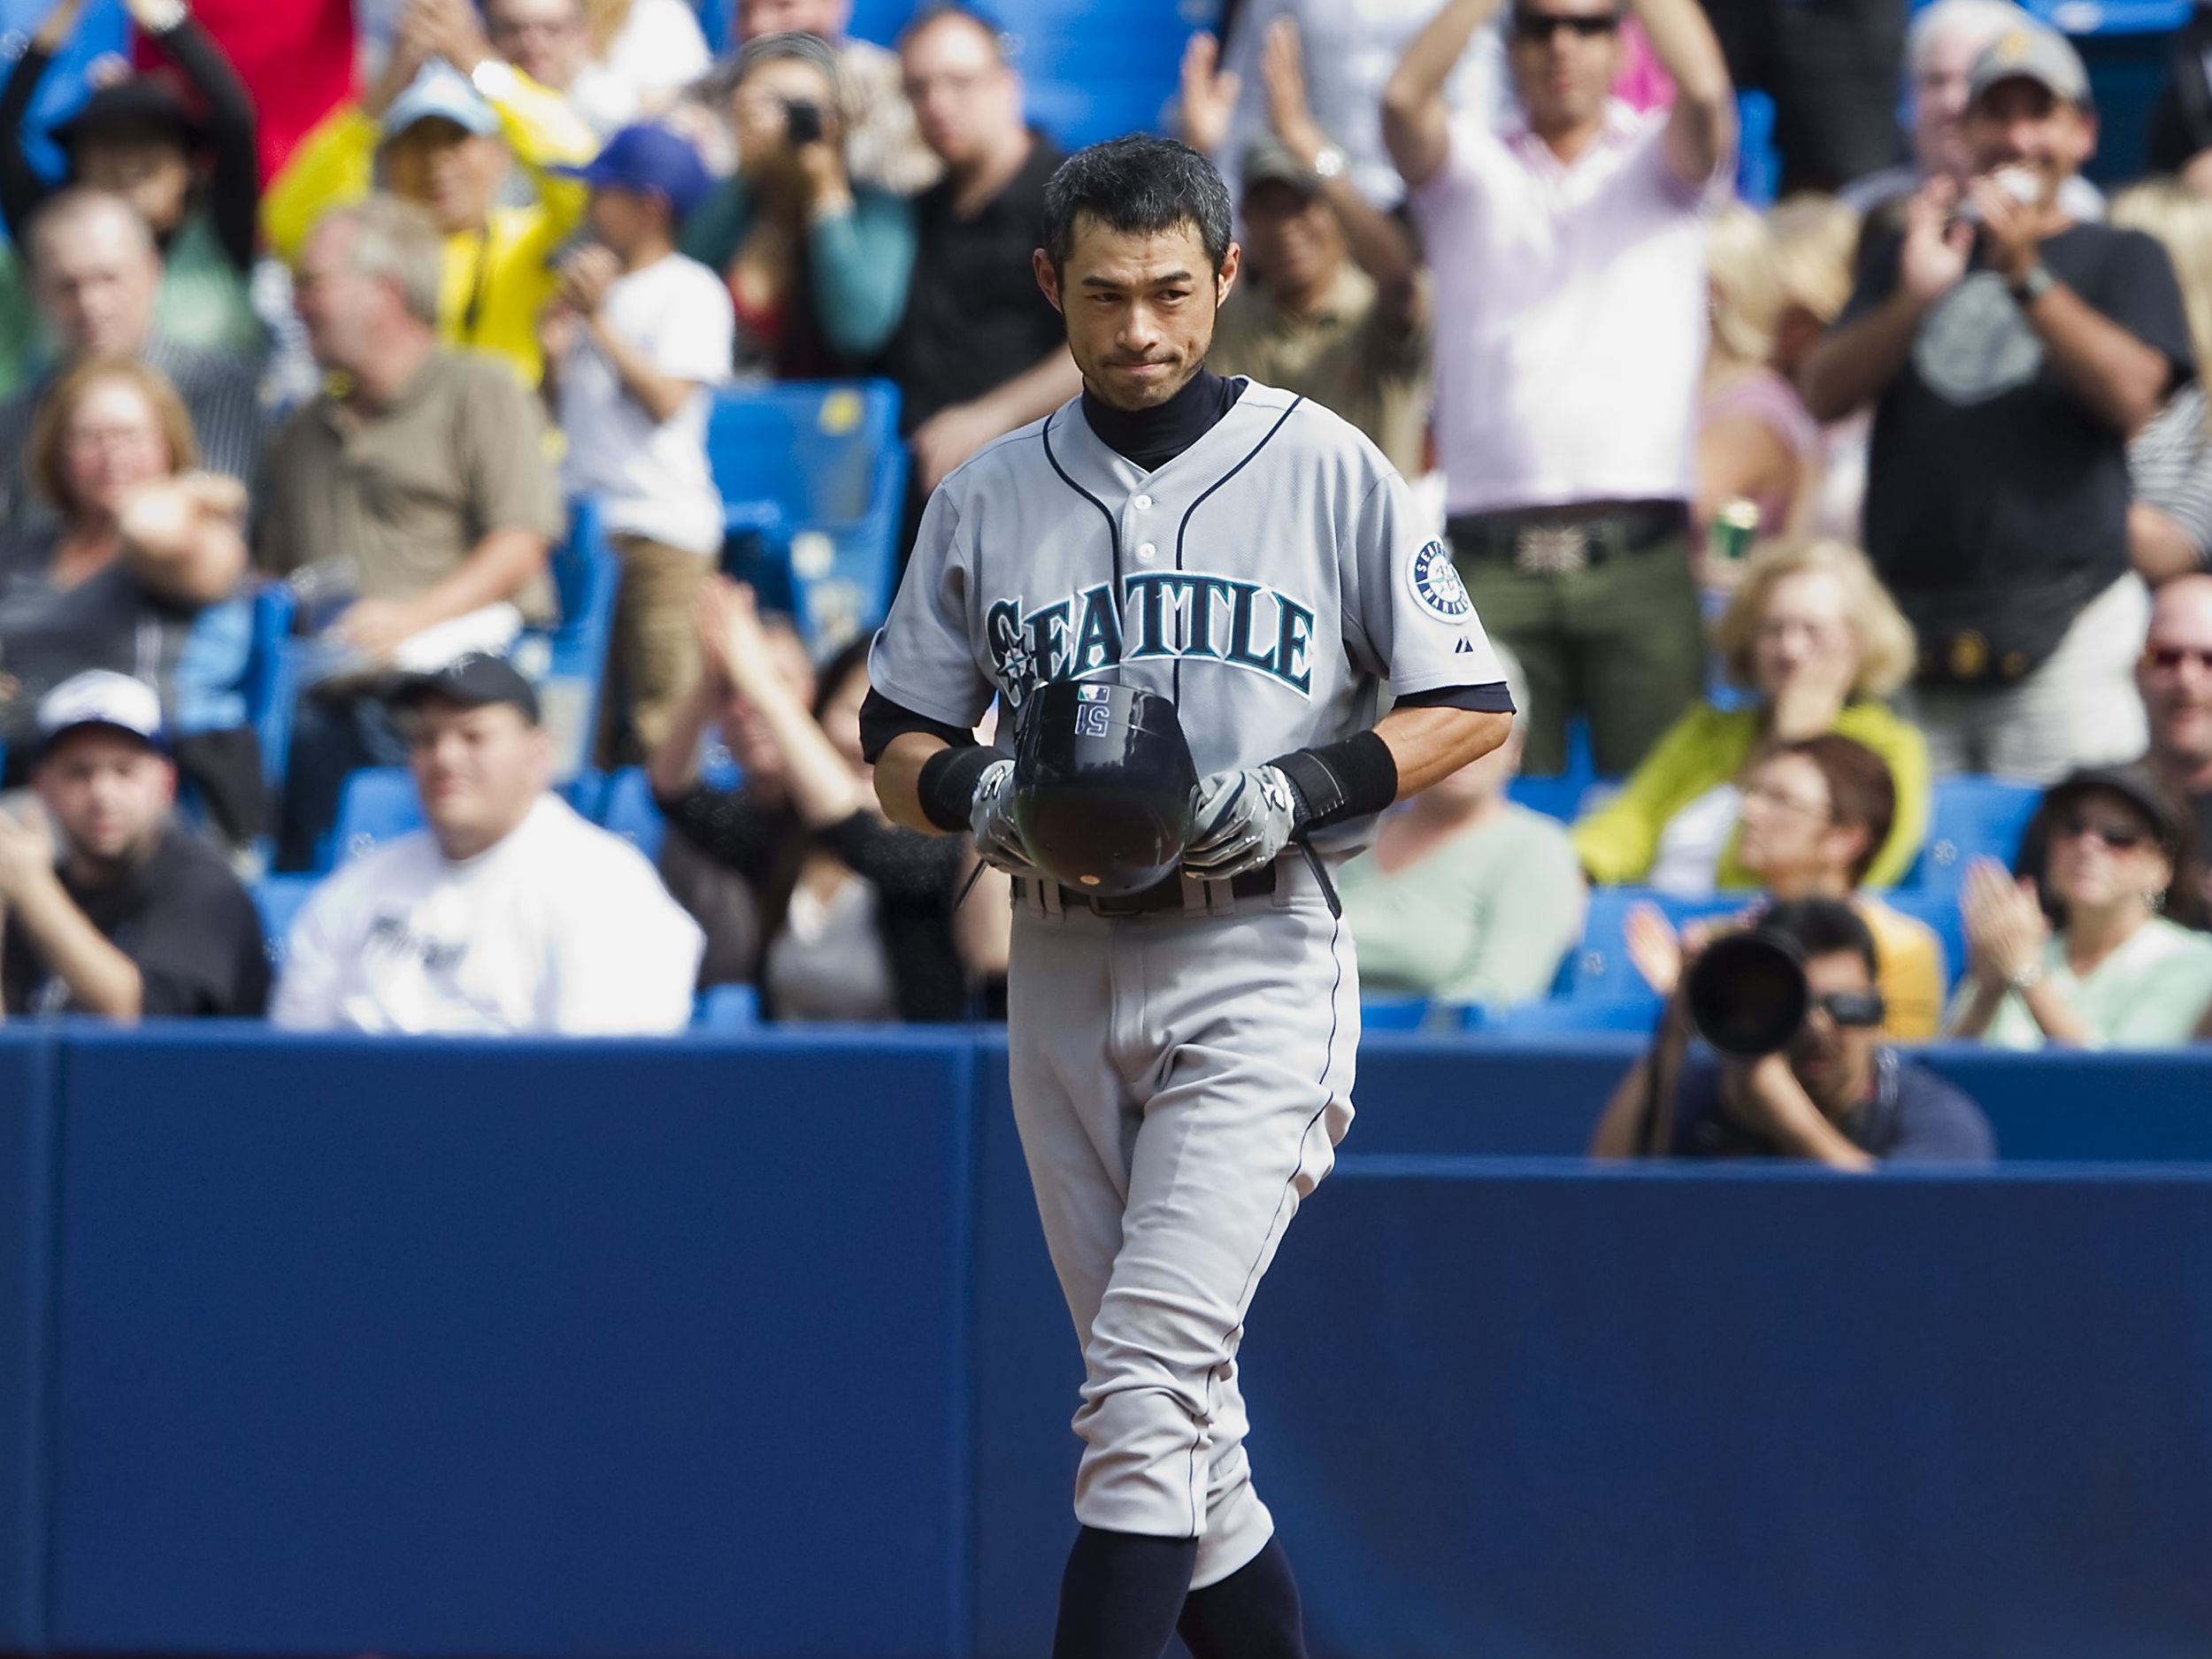 History for Jose: Bautista 26th player to hit 50 homers as Jays